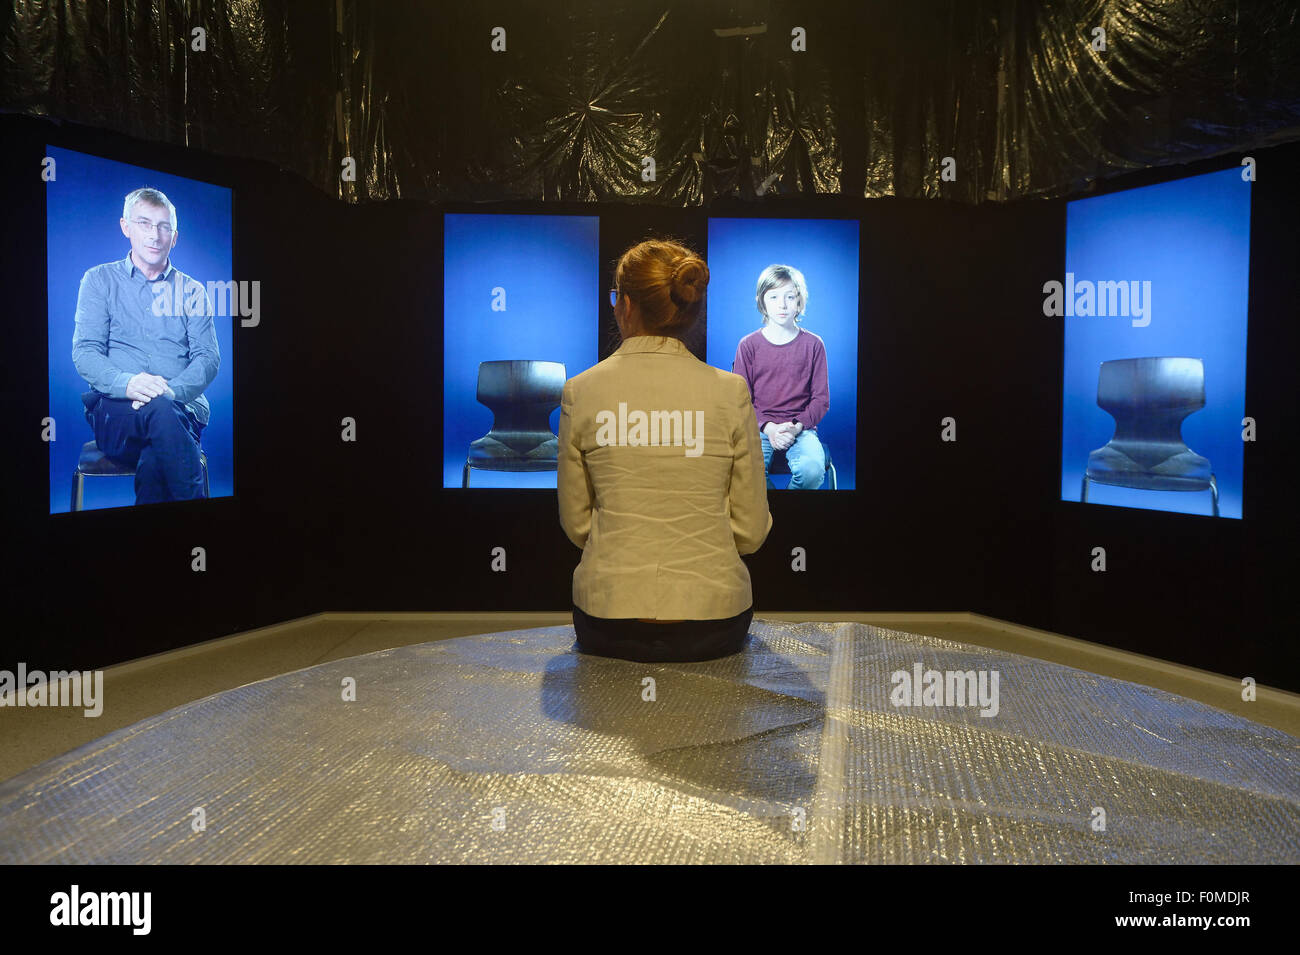 A woman sits in front of a video installation entitled 'Rumpelstilzchen erzaehlen' (Rumpelstiltskins narrating) by Hannah Leonie Prinzler during a pre-opening tour of Grimmwelt (Grimm World) in Kassel, Germany, 18 August 2015. The new exhibition centre on the German folklore collectors and authors Jacob and Wilhelm Grimm is scheduled to open on 04 September 2015. Photo: SWEN PFOERTNER/dpa Stock Photo